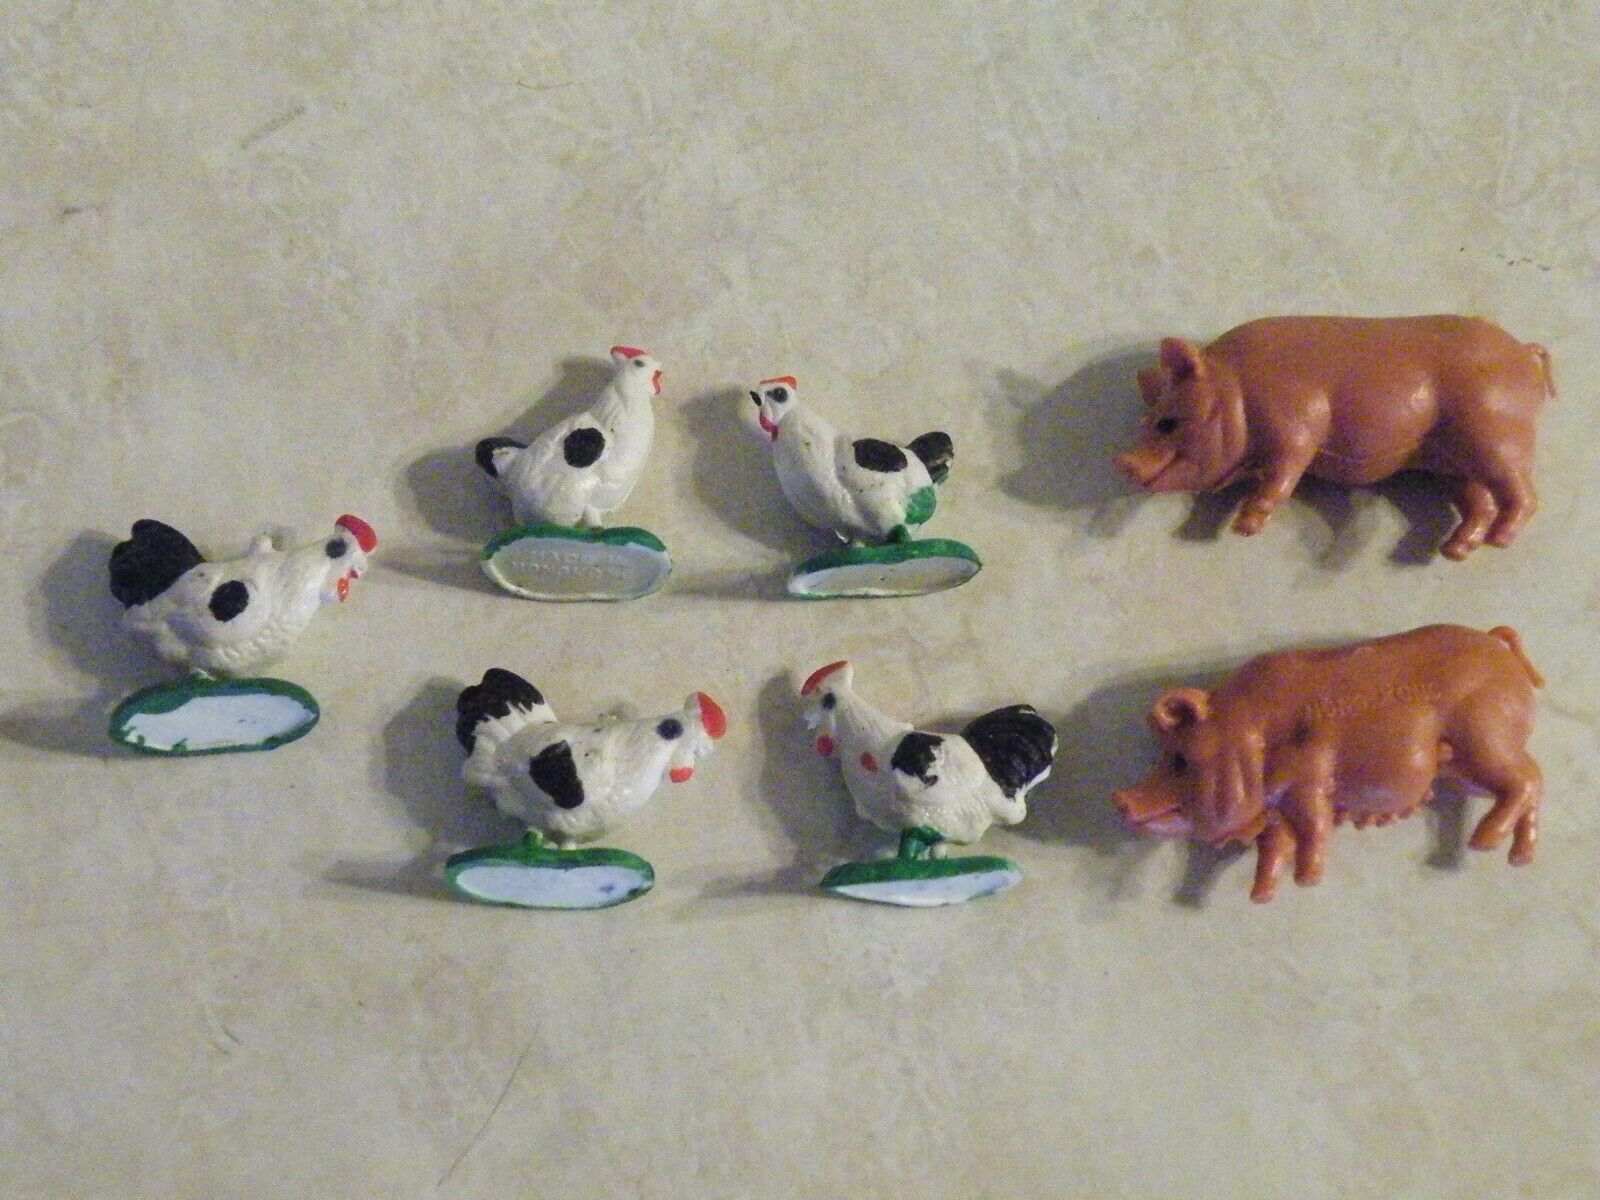 7 Vintage Miniature Farm Figures 5 Roosters & 2 Pigs Hong Kong  Free Ship